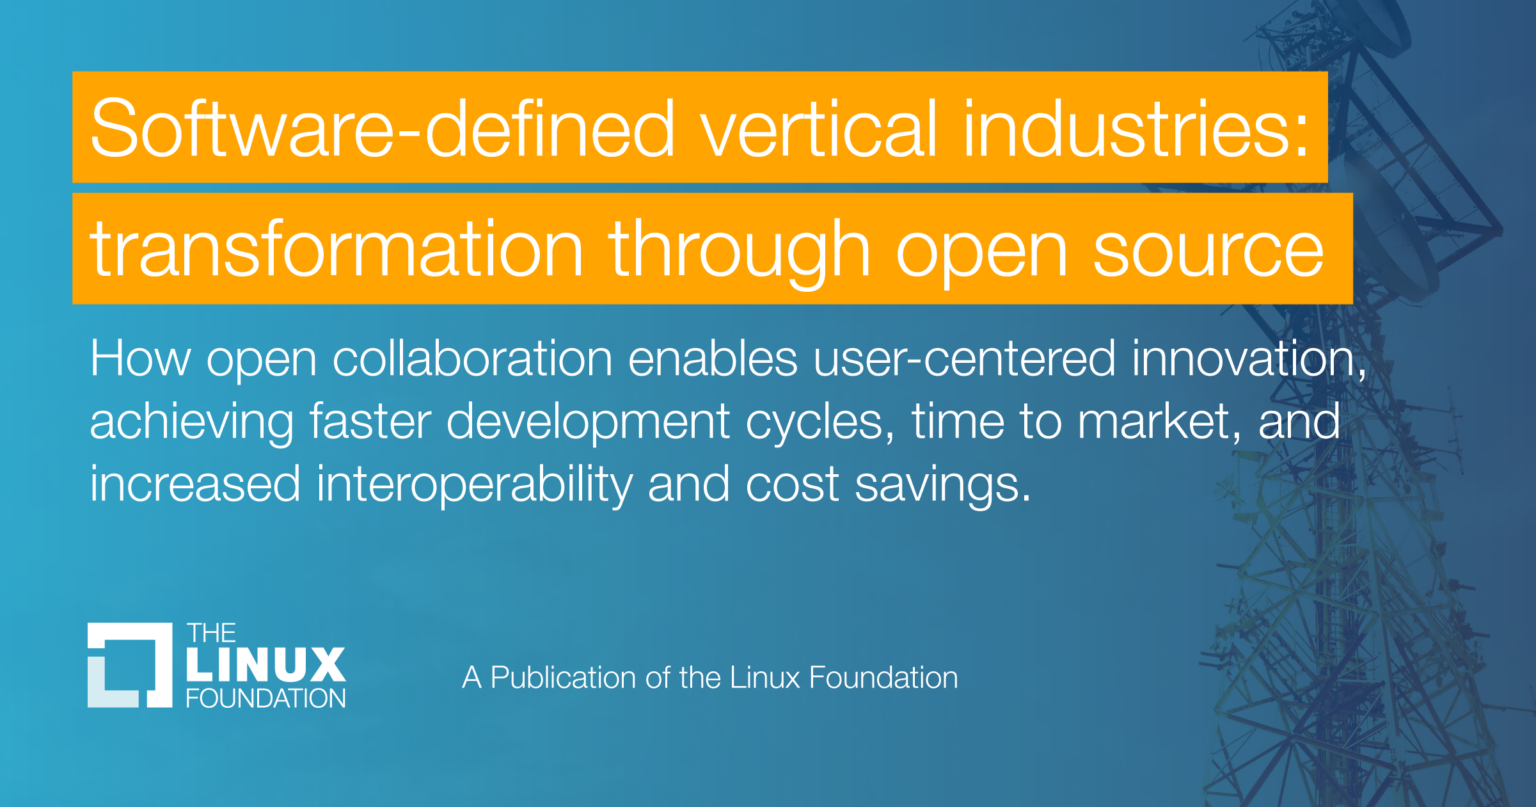 Software-defined vertical industries: transformation through open source